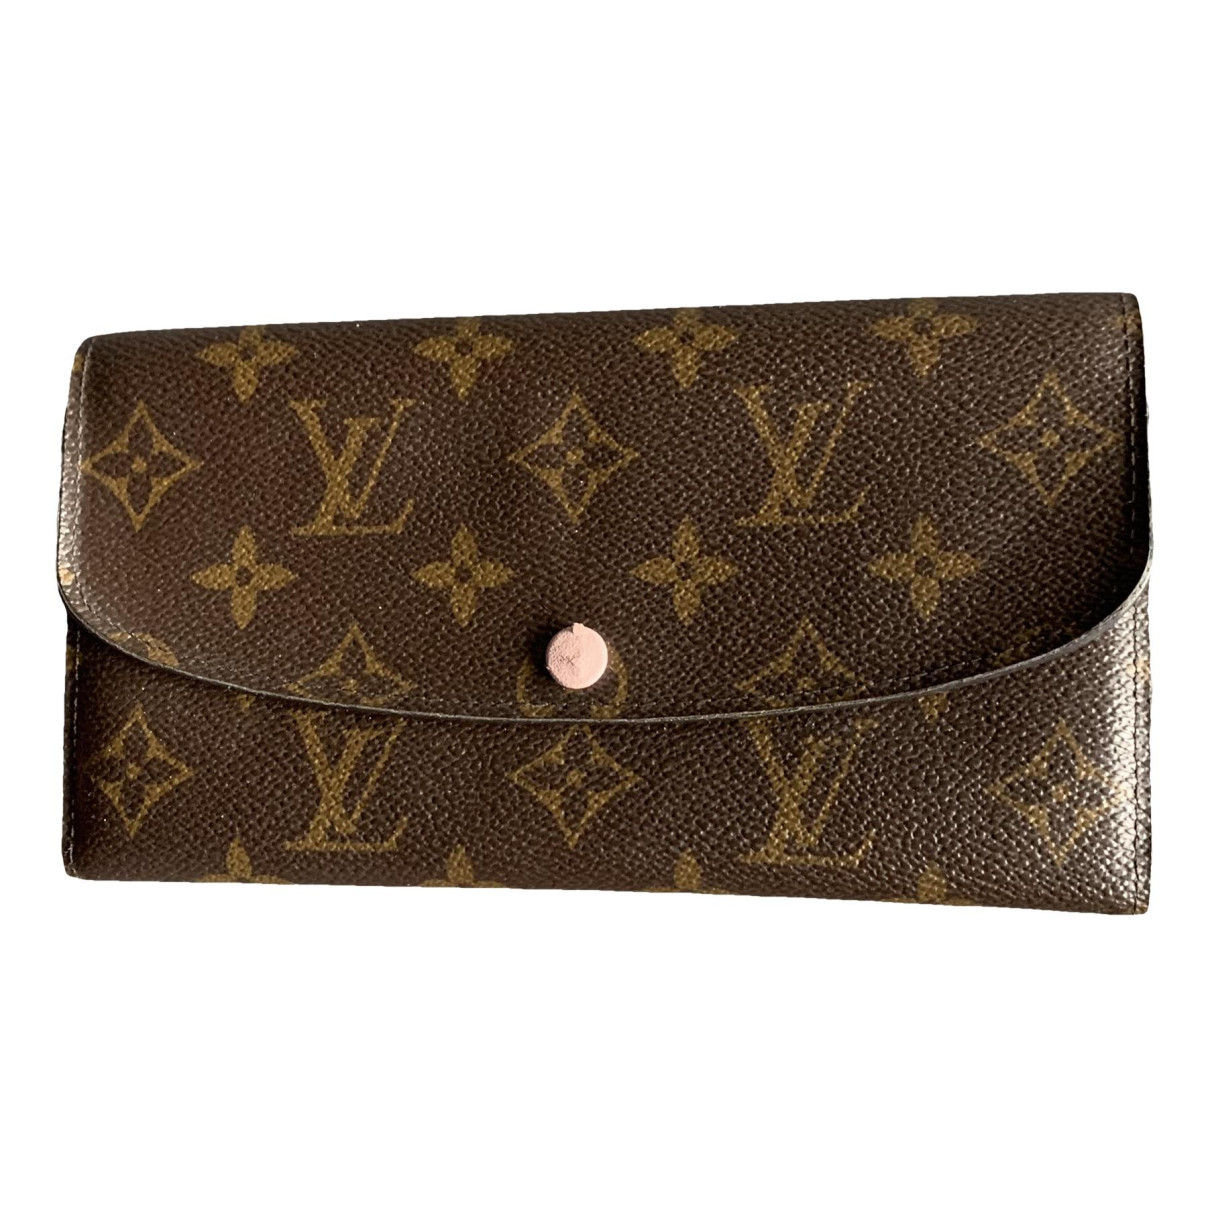 accessories Louis Vuitton wallets for Female Cloth. Used condition